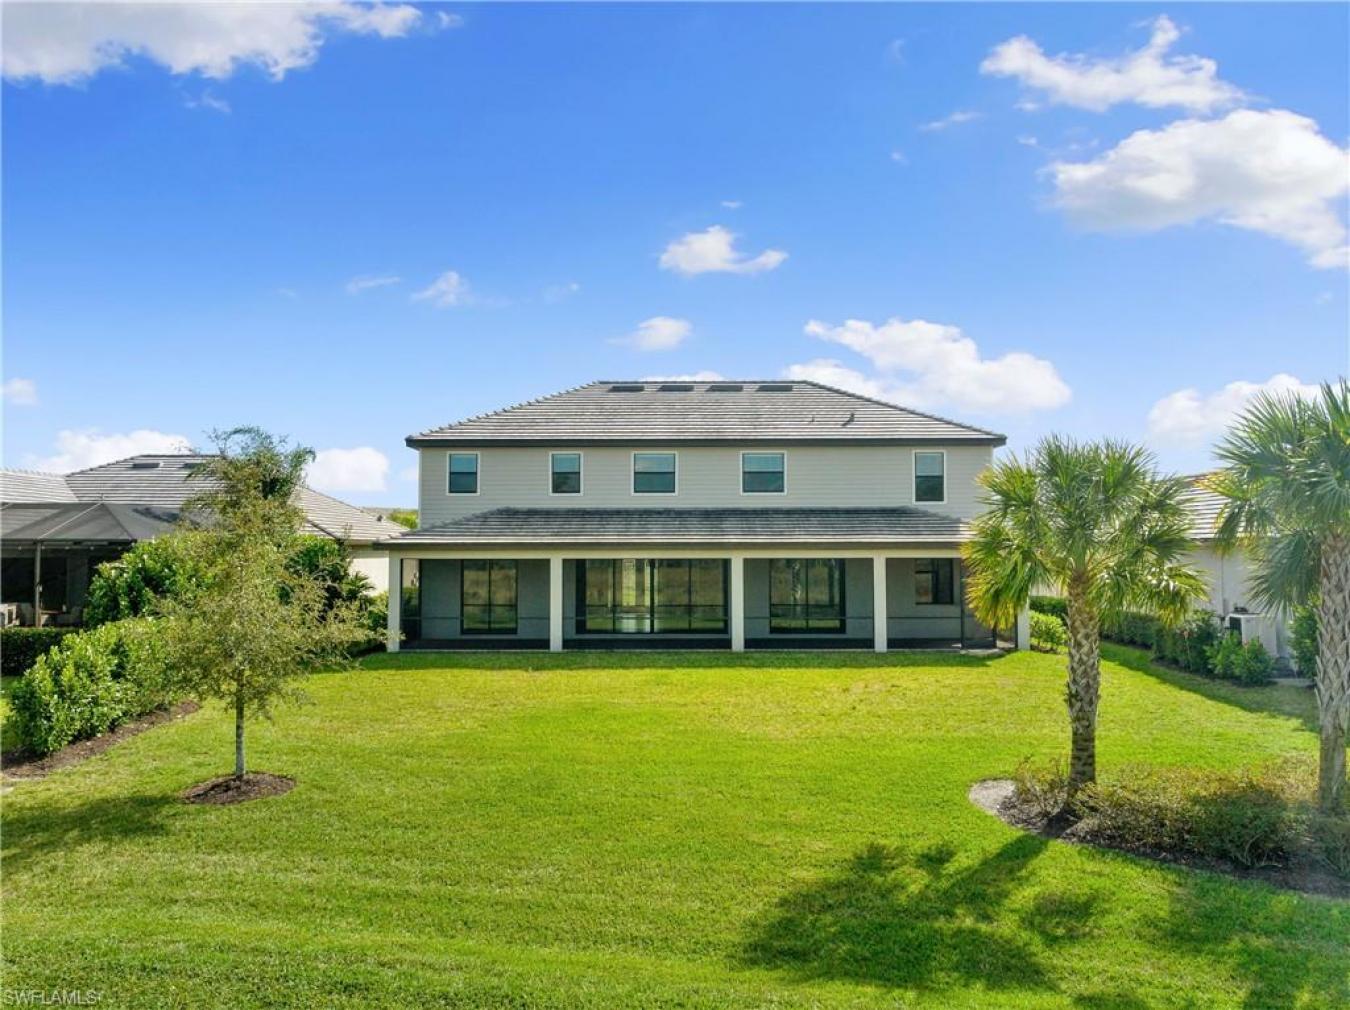 17858 Rosehill Court, ESTERO, Florida, 33928, United States, 5 Bedrooms Bedrooms, ,4 BathroomsBathrooms,Residential,For Sale,17858 Rosehill Court,1501867